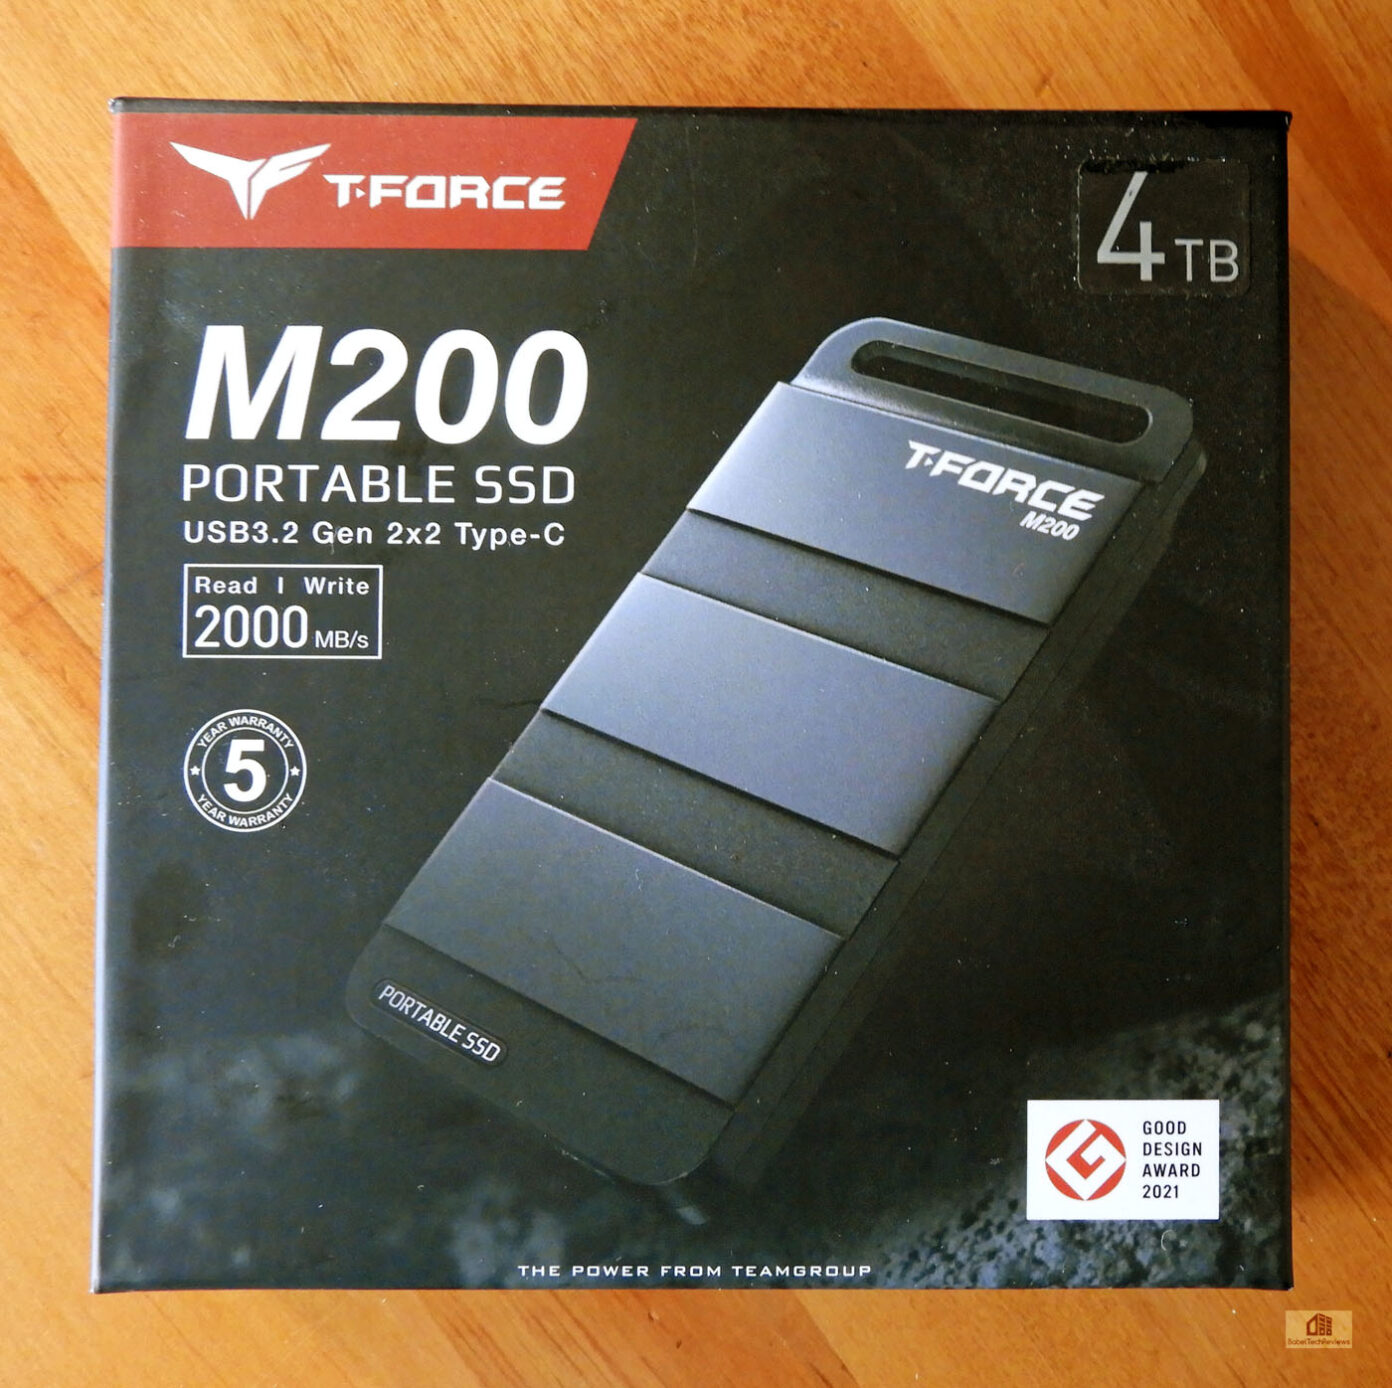 The T-FORCE M200 4TB USB 3.2 Gen2x2 Type-C Portable SSD Gaming